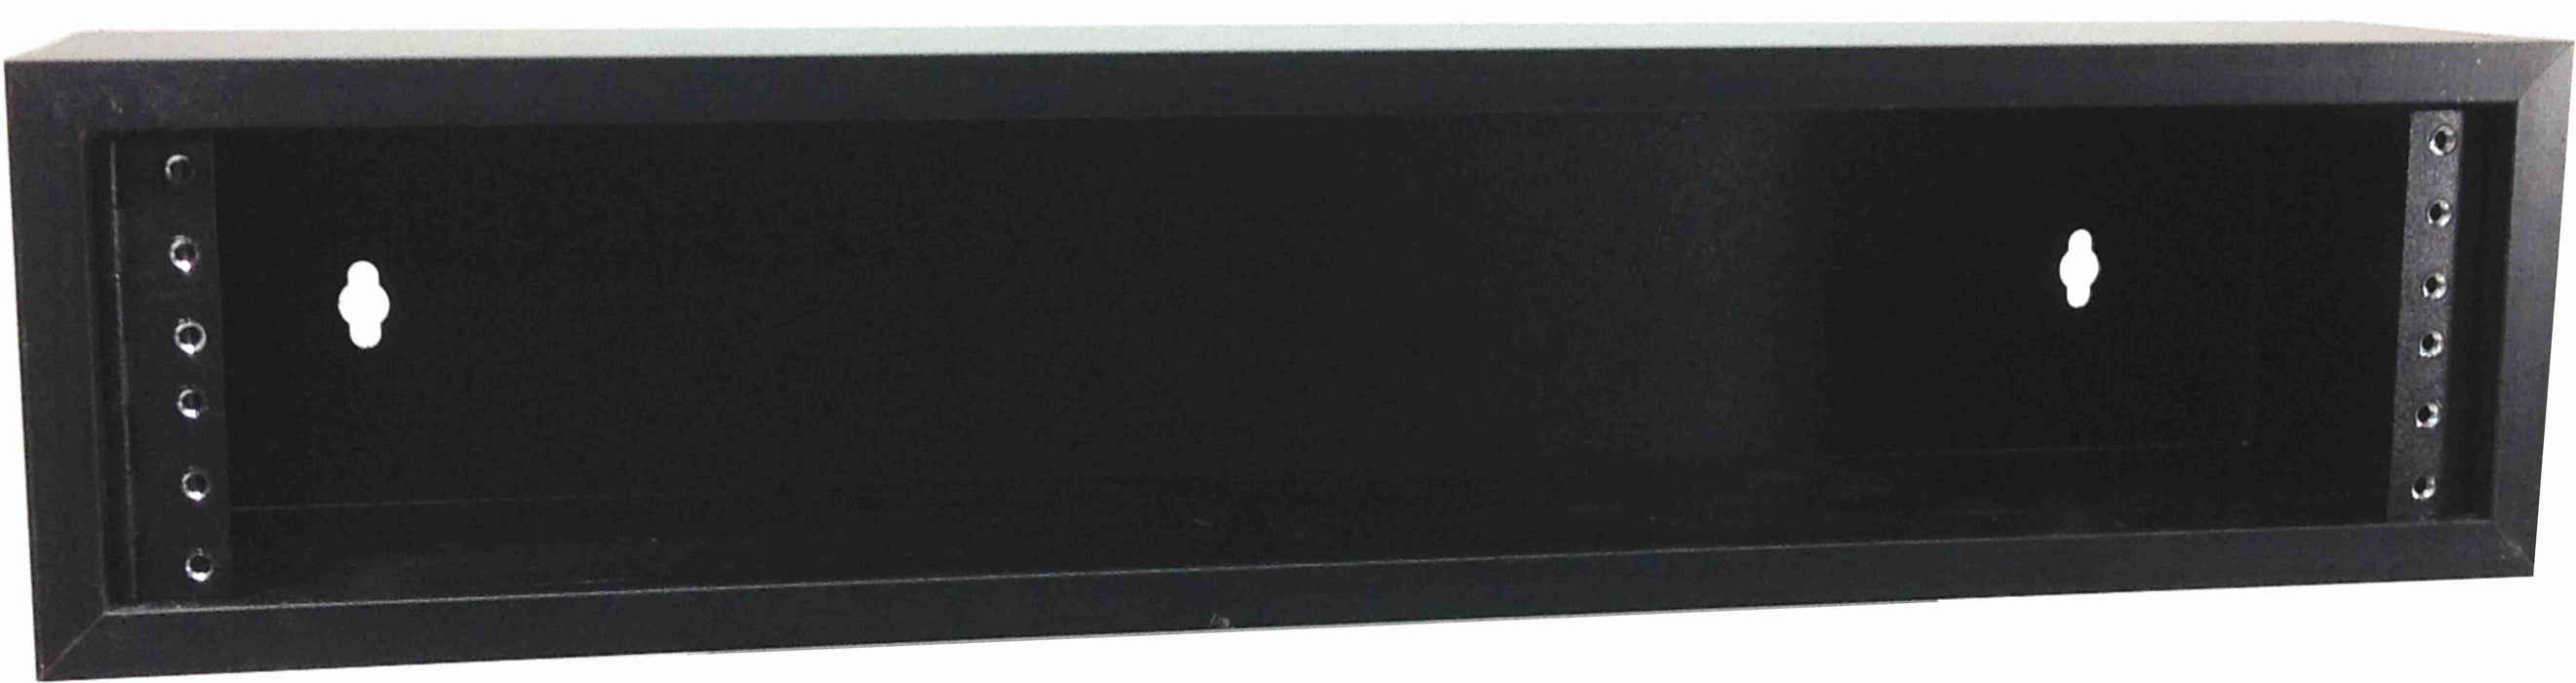 AMERICAN RECORDER - 2RU Enclosure for LED Lighted Sign - AMERICAN RECORDER TECHNOLOGIES, INC.